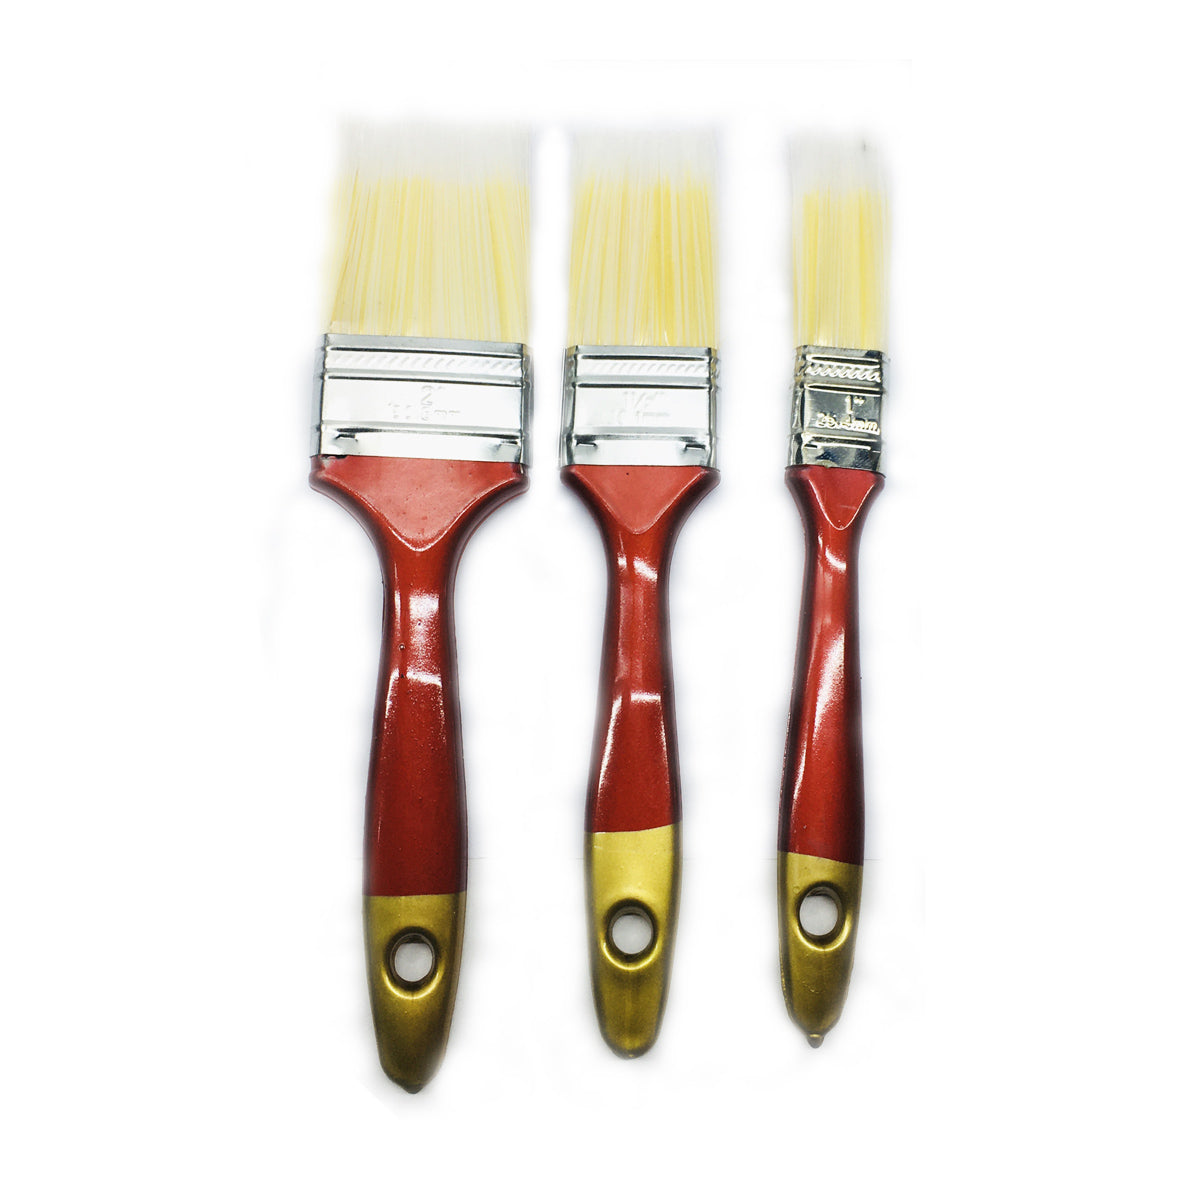 Set of 3 Different Size Brushes (2, 1.5 & 1 Inches)